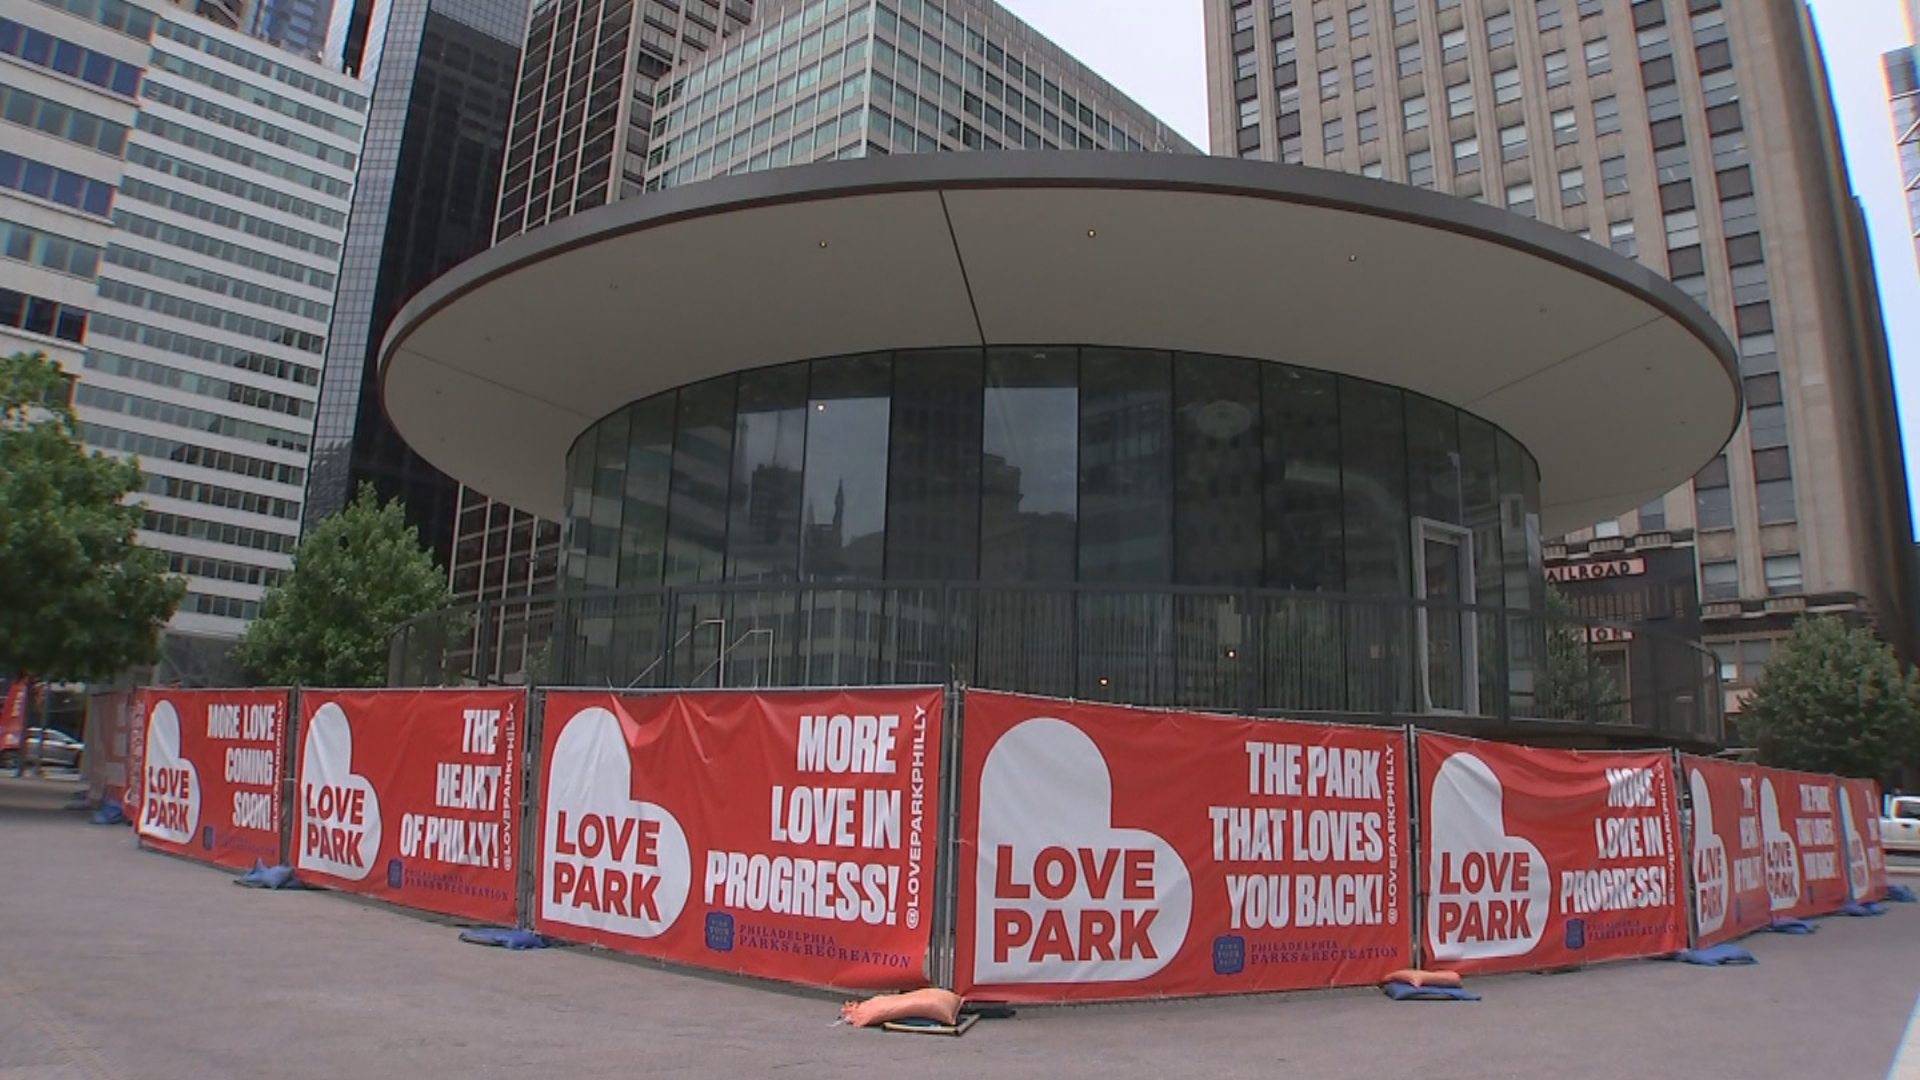 Philadelphia Seeking Someone To Open Restaurant At Former LOVE Park Welcome Center – CBS Philly